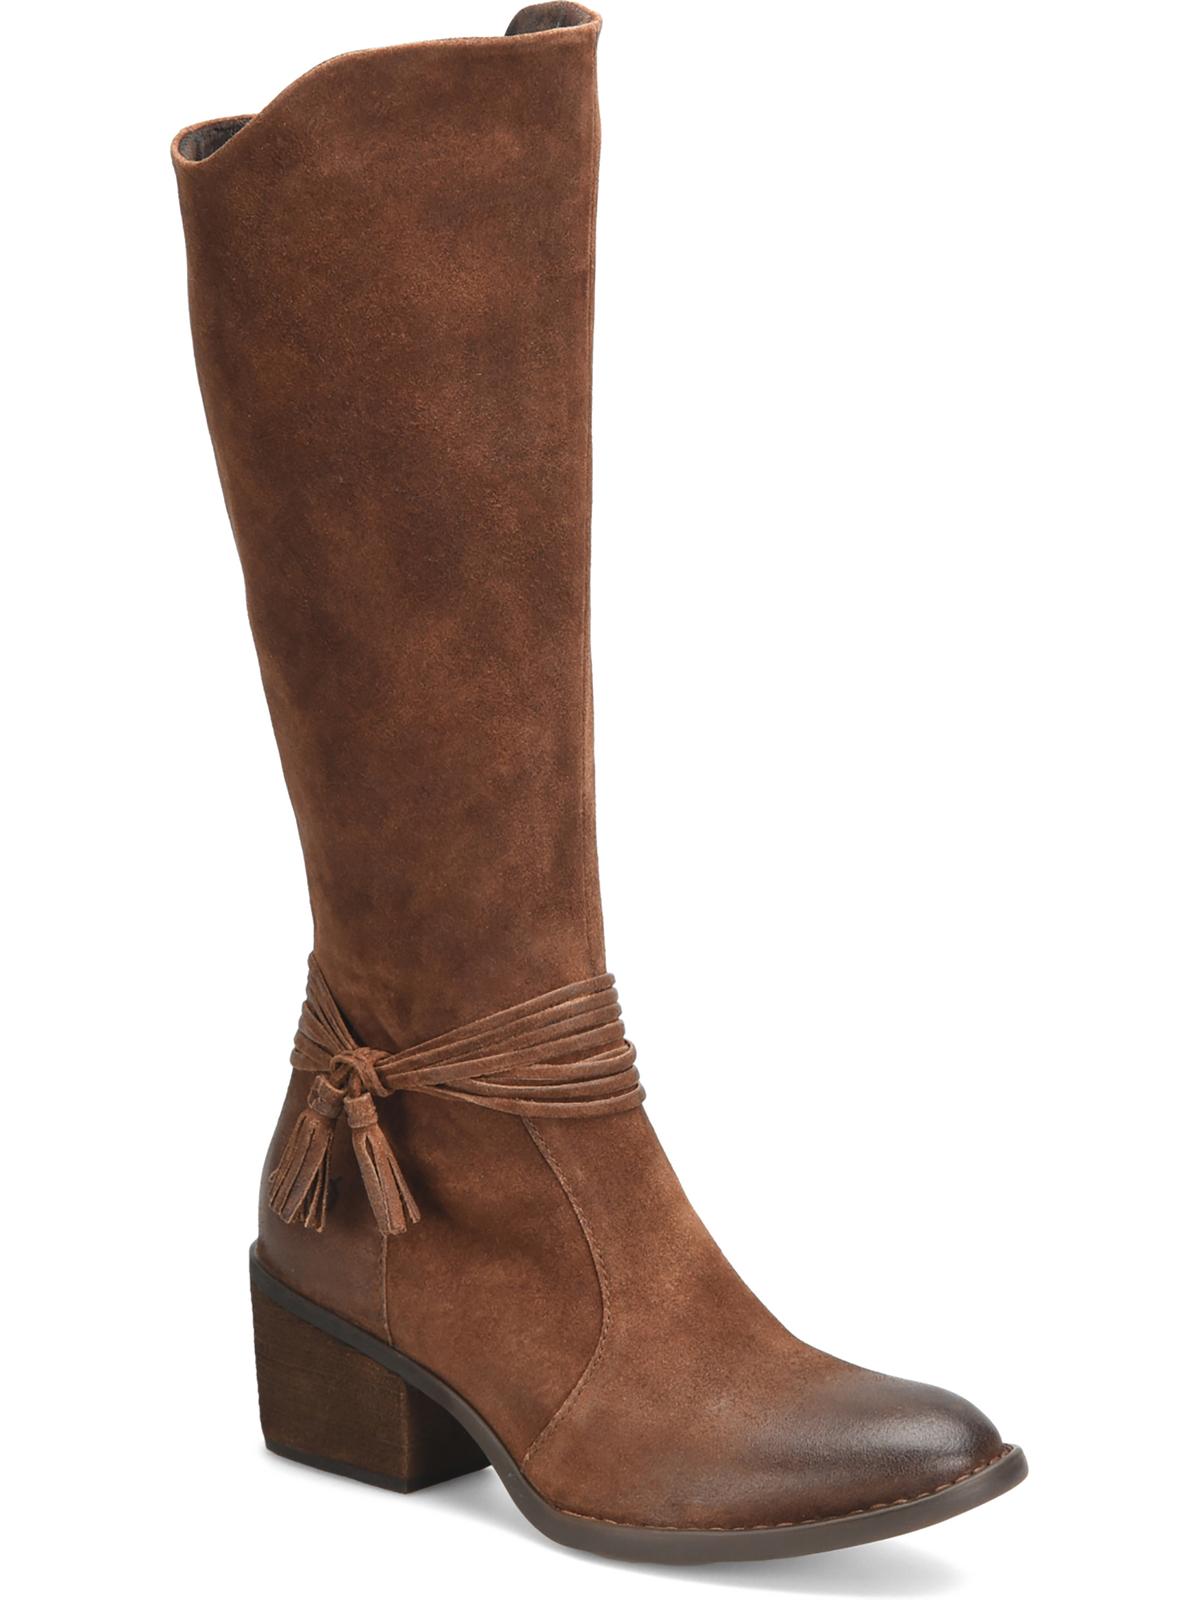 BORN Quinn Womens Leather Round Toe Mid-Calf Boots